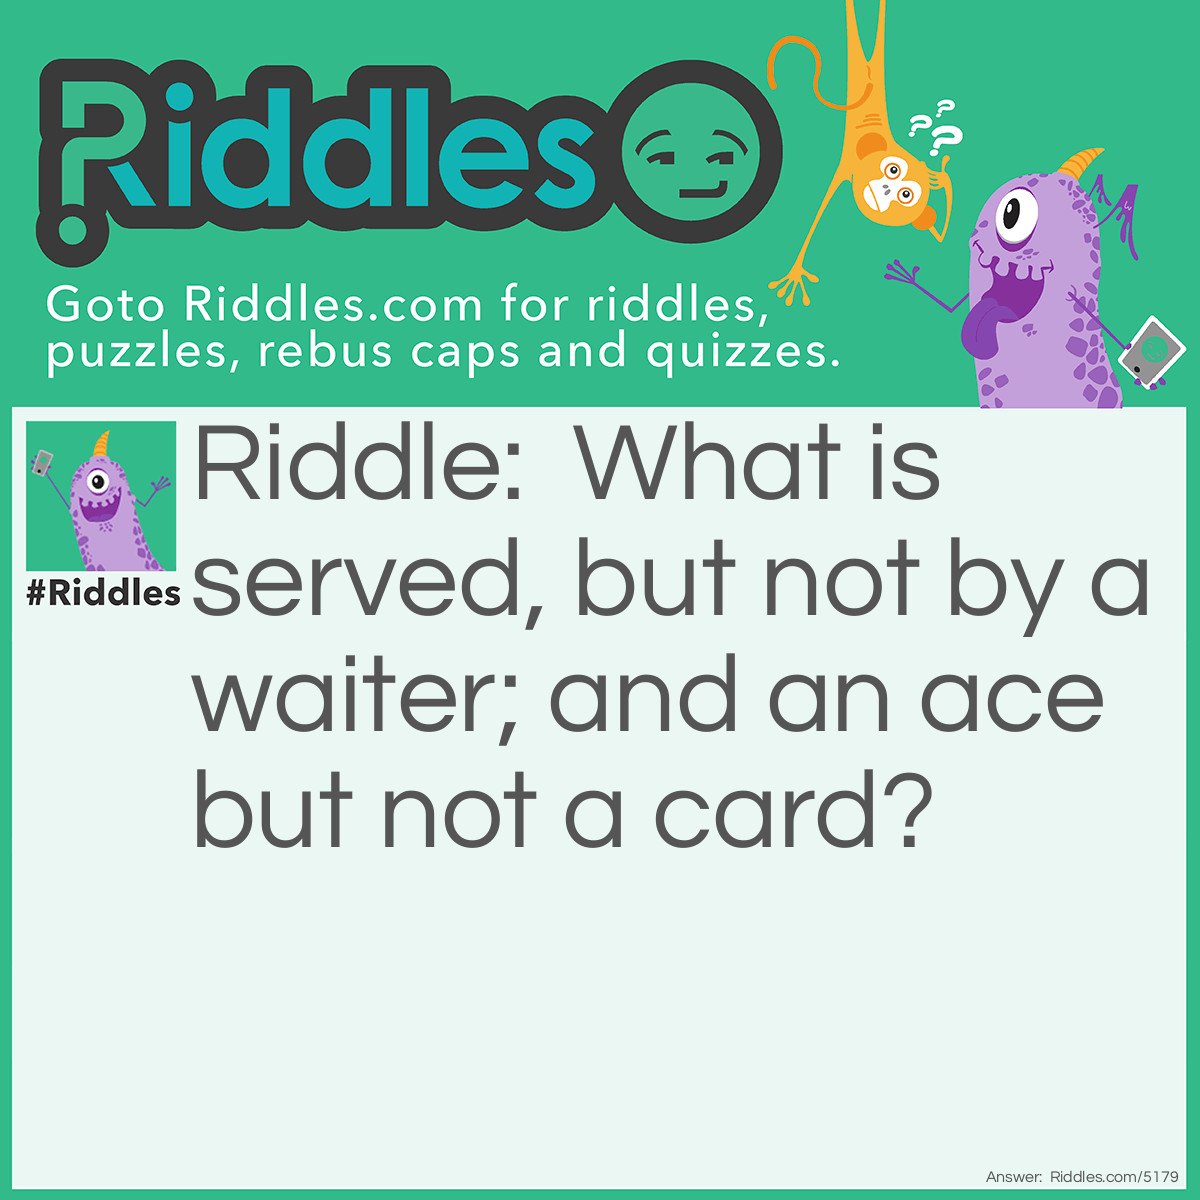 Riddle: What is served, but not by a waiter; and an ace but not a card? Answer: A volleyball: serving is a classic volleyball move, and a serve that drops without the opposing team touching it is called an ace.